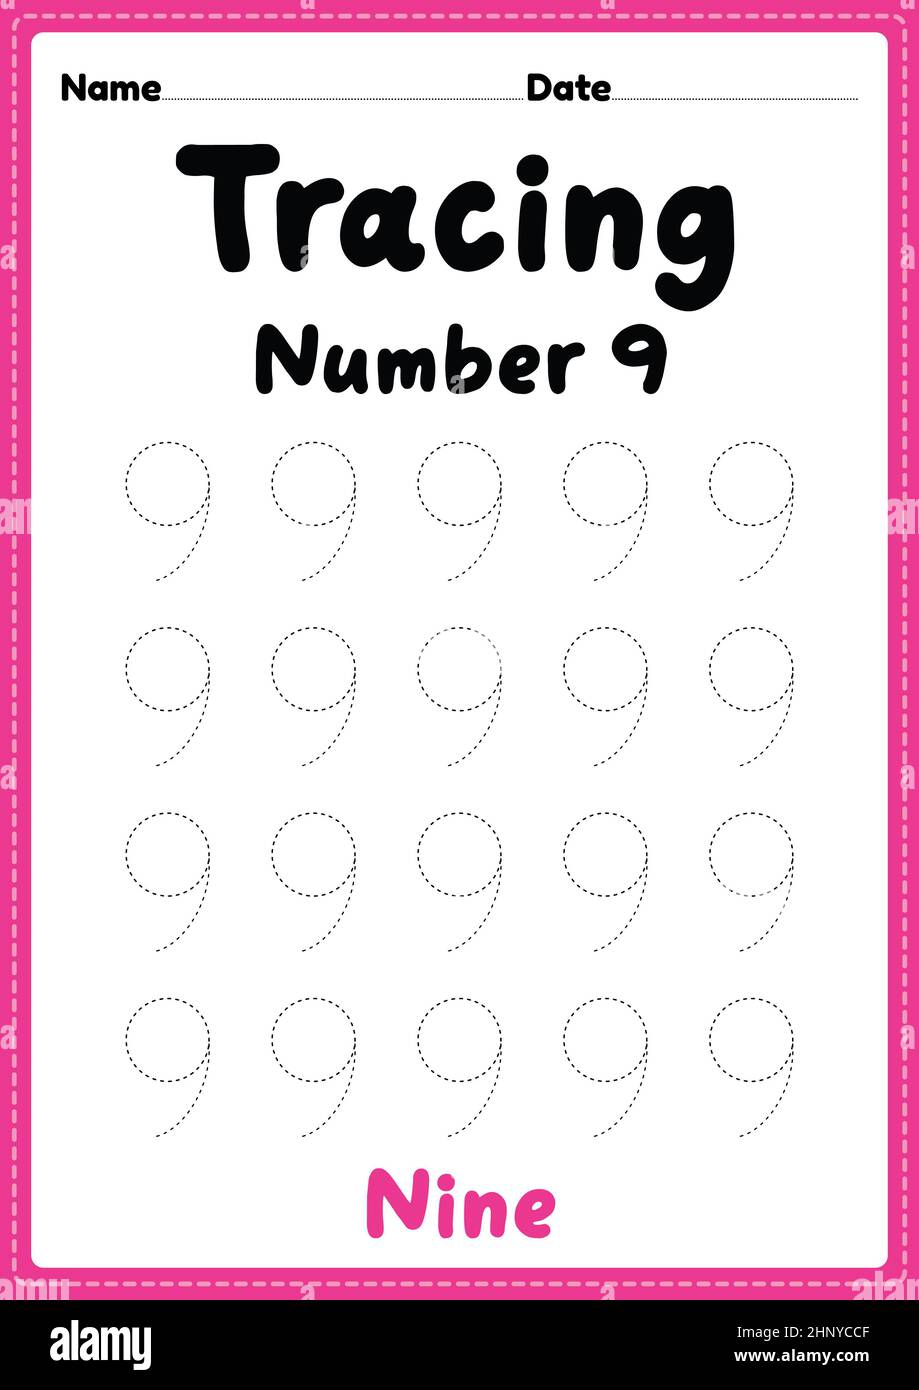 Tracing number 9 worksheet for kindergarten, preschool and Montessori kids for learning numbers and handwriting practice activities. Stock Photo